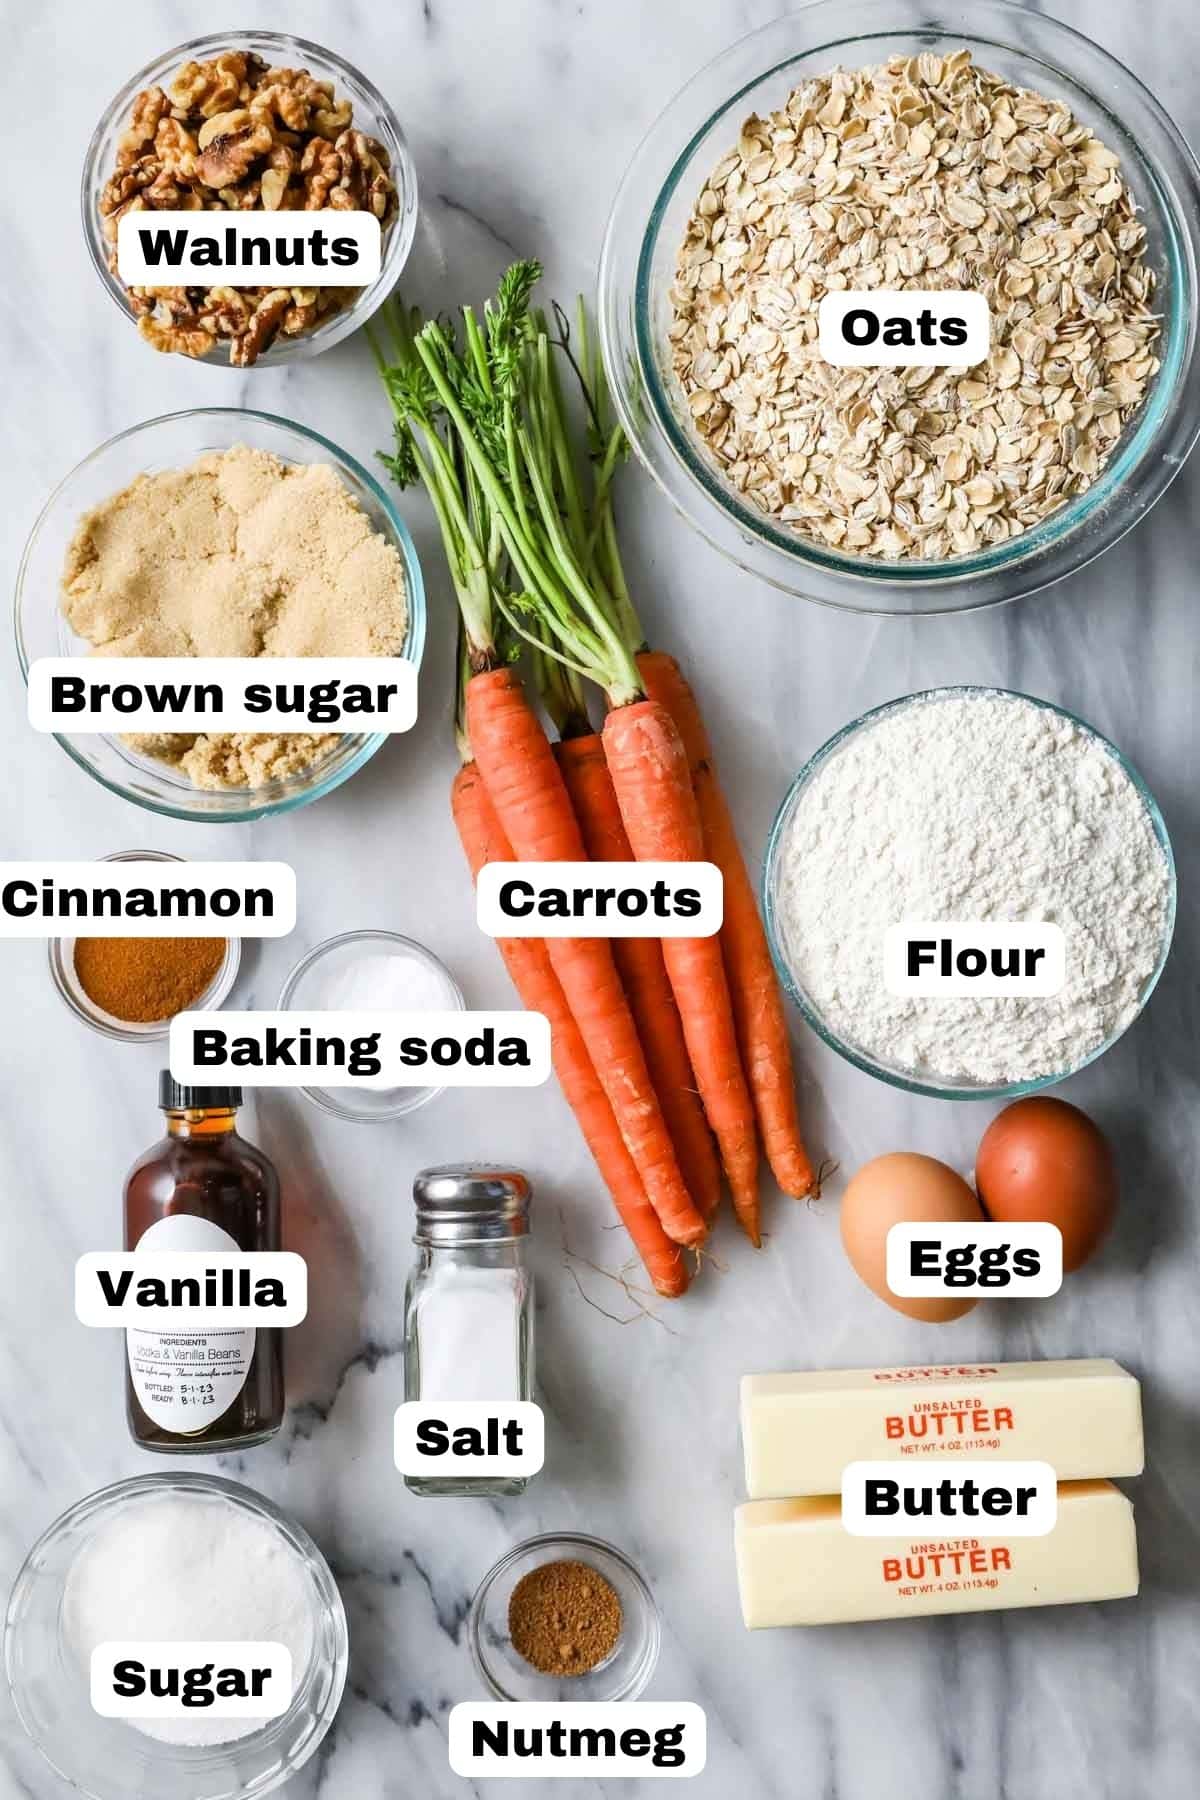 Overhead view of labeled ingredients including carrots, oats, walnuts, and more.